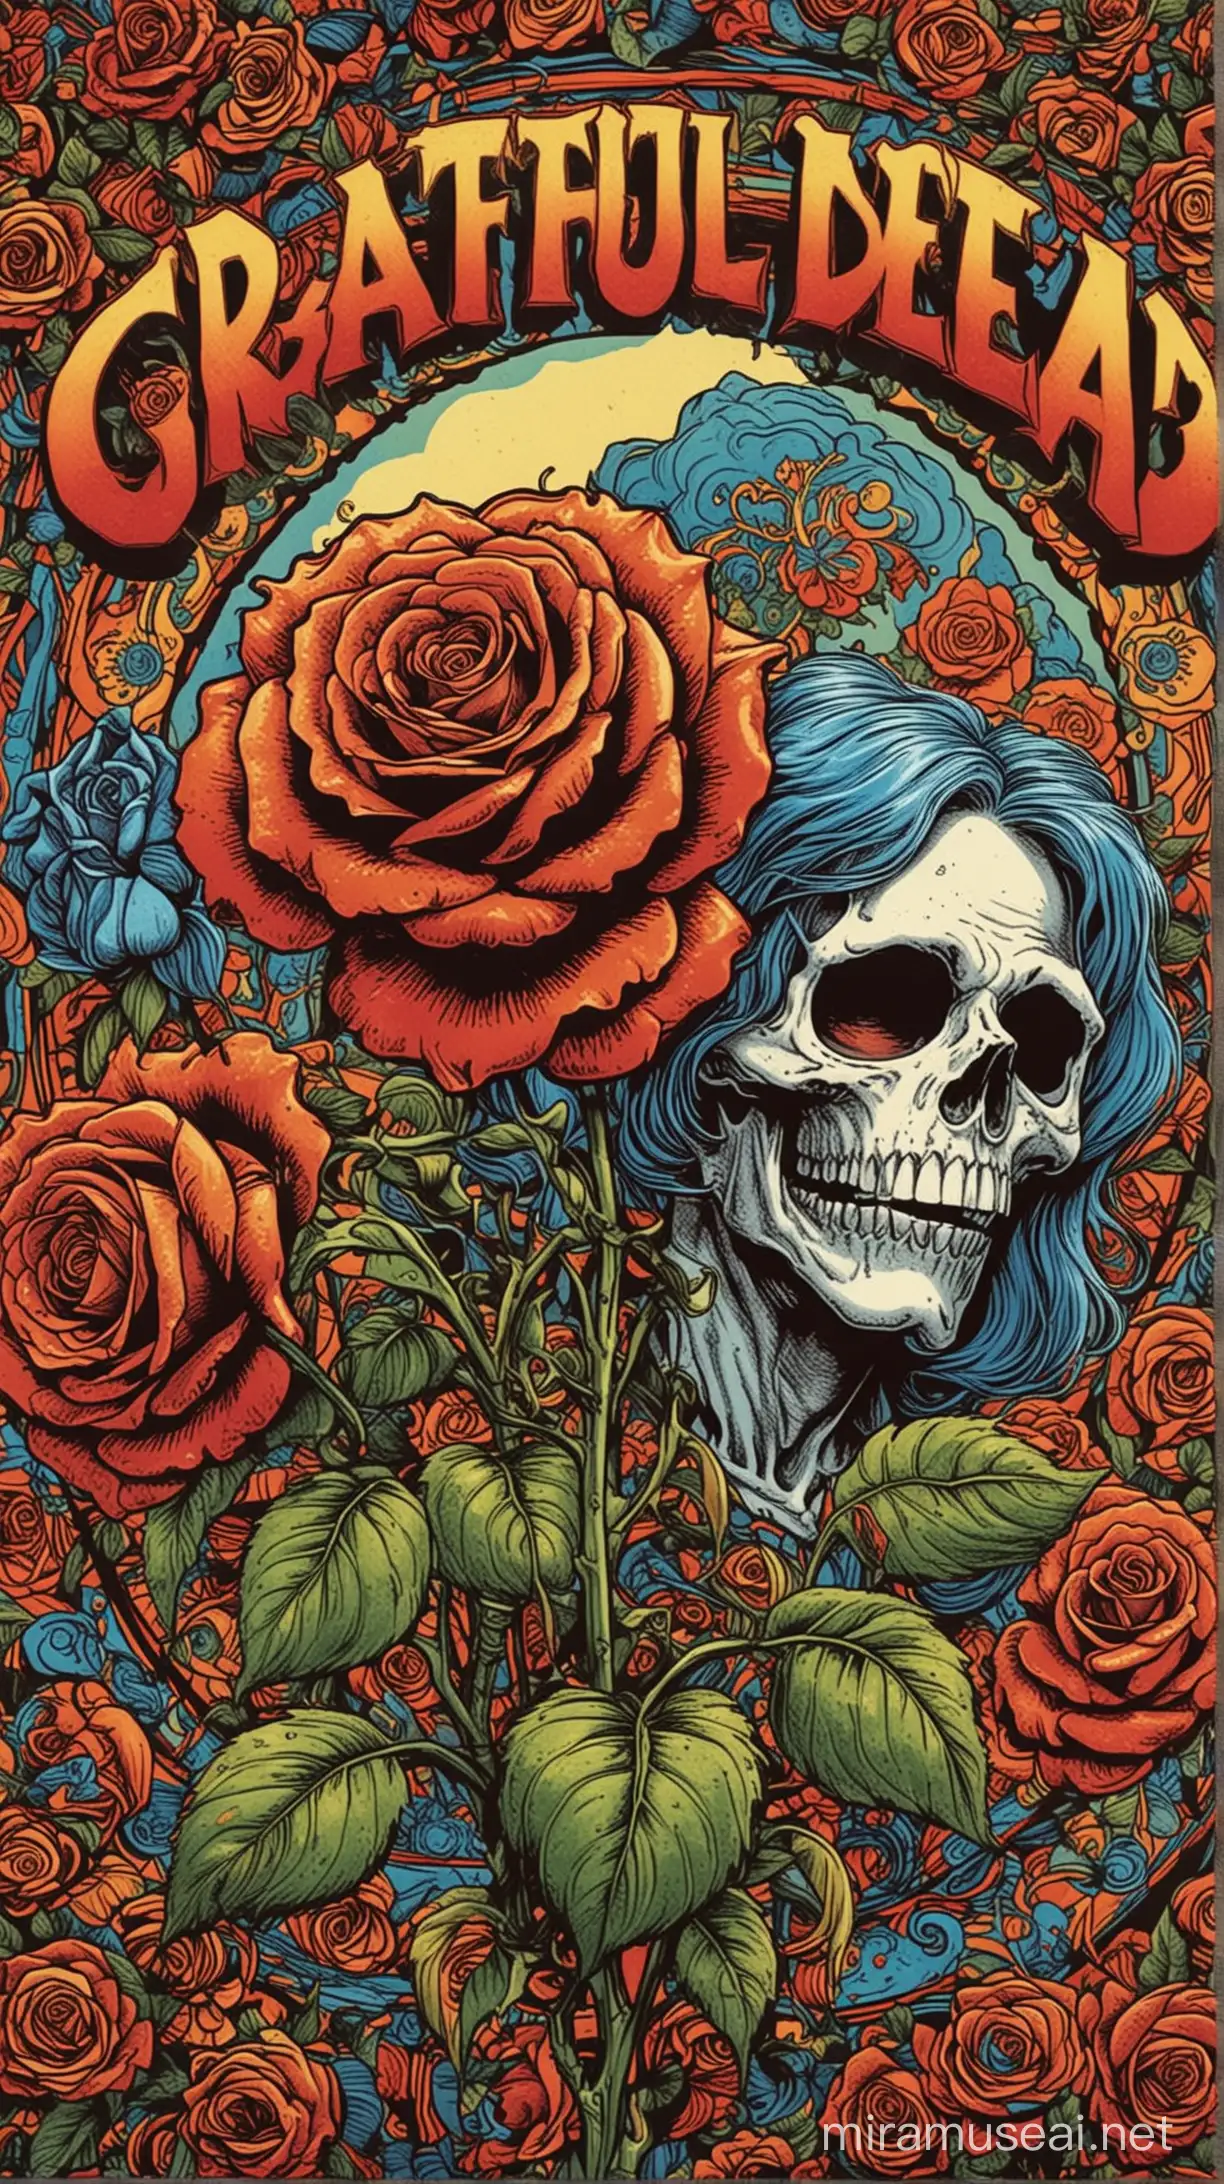 grateful dead roses 70s comicbook style 